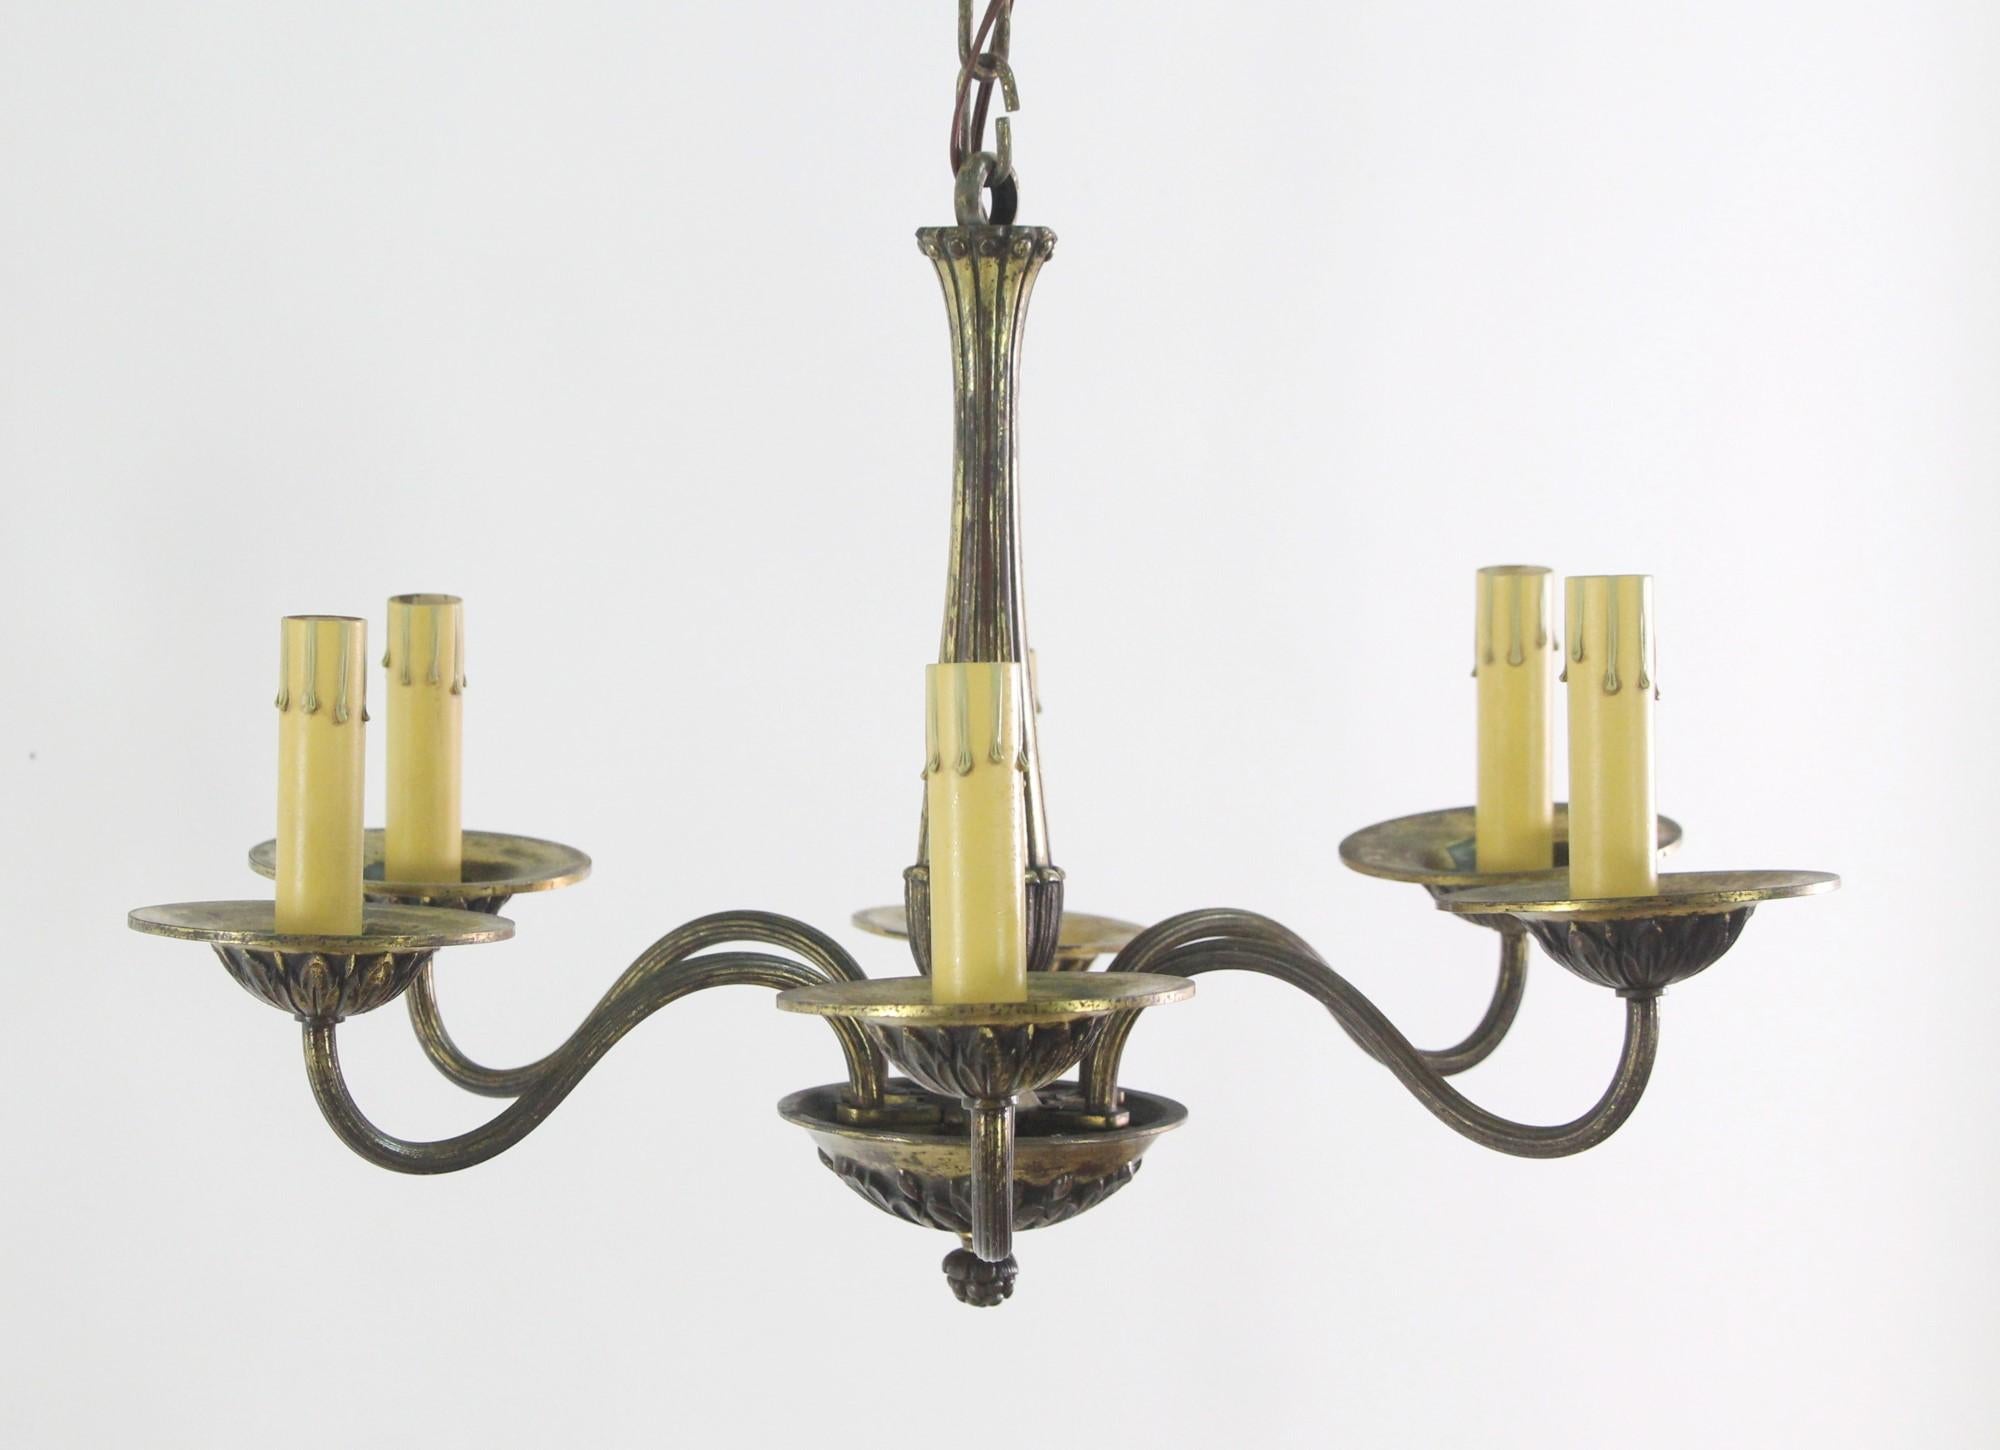 French Provincial Petite French 6 Light Brass Chandelier Elegant Design Early 1900's For Sale